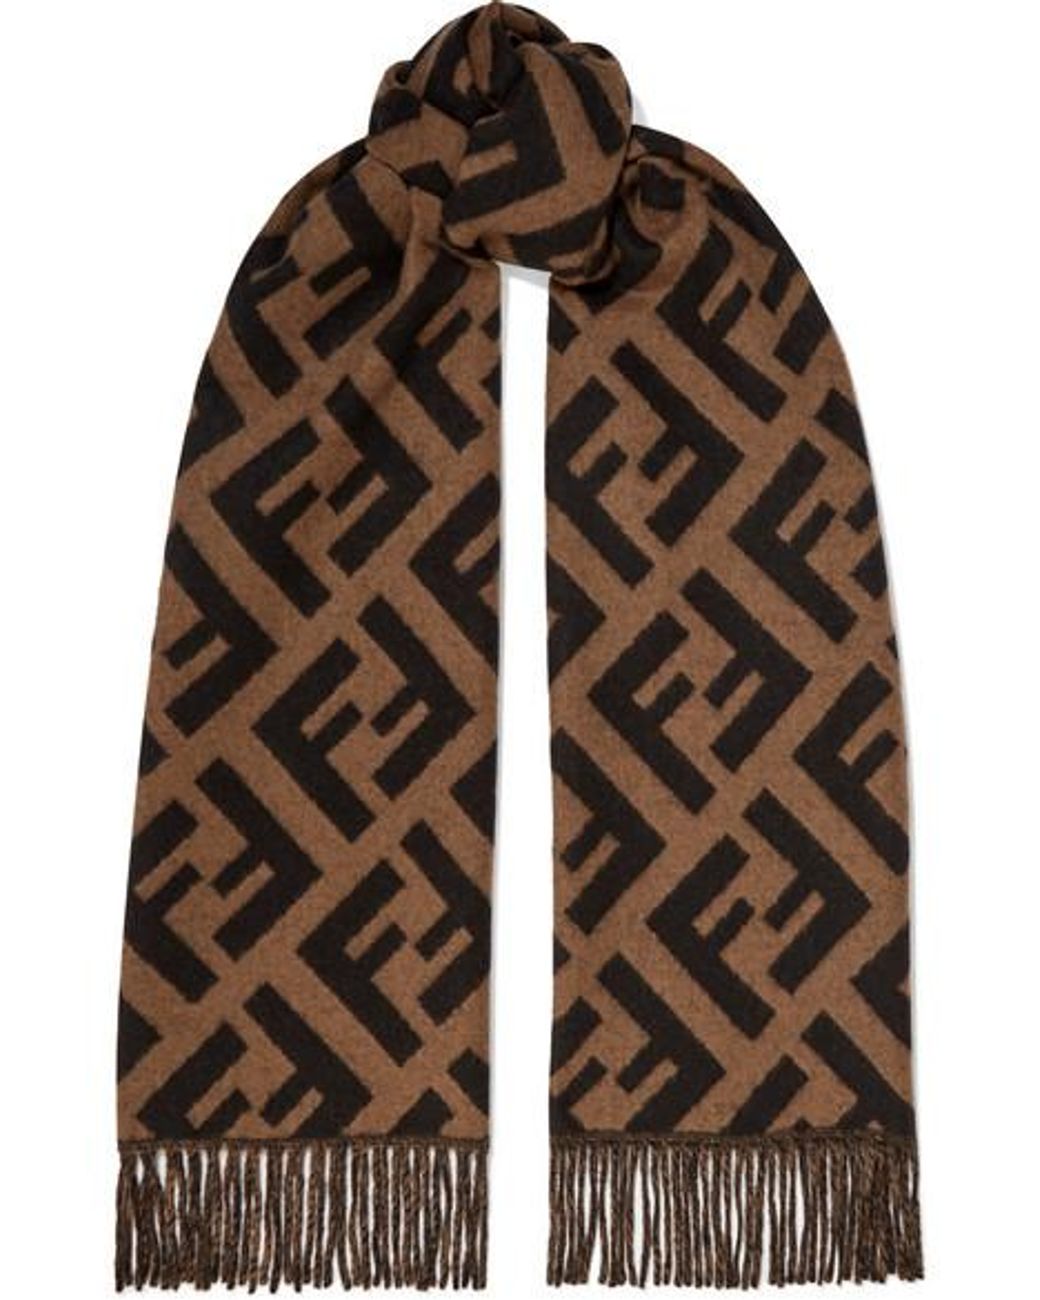 Fendi Fringed Cashmere-jacquard Scarf in Brown | Lyst